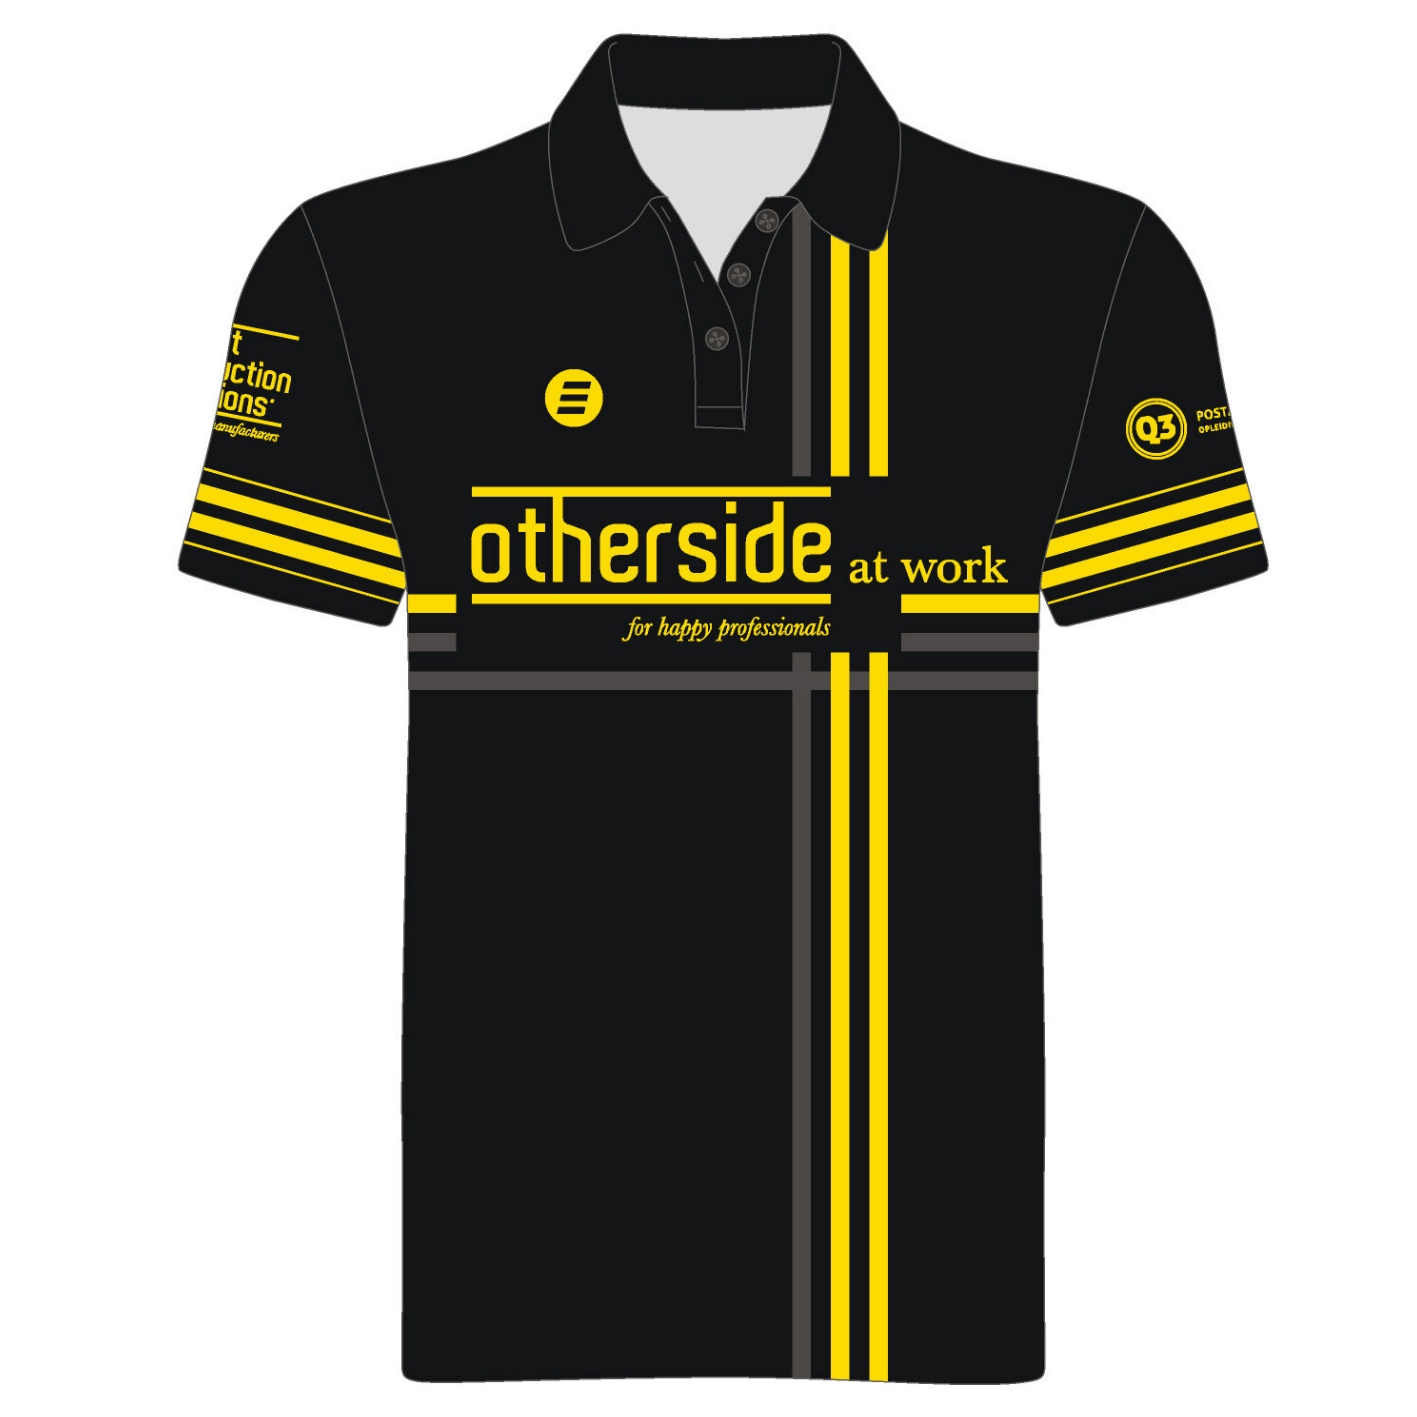 Otherside at Work Sport polo